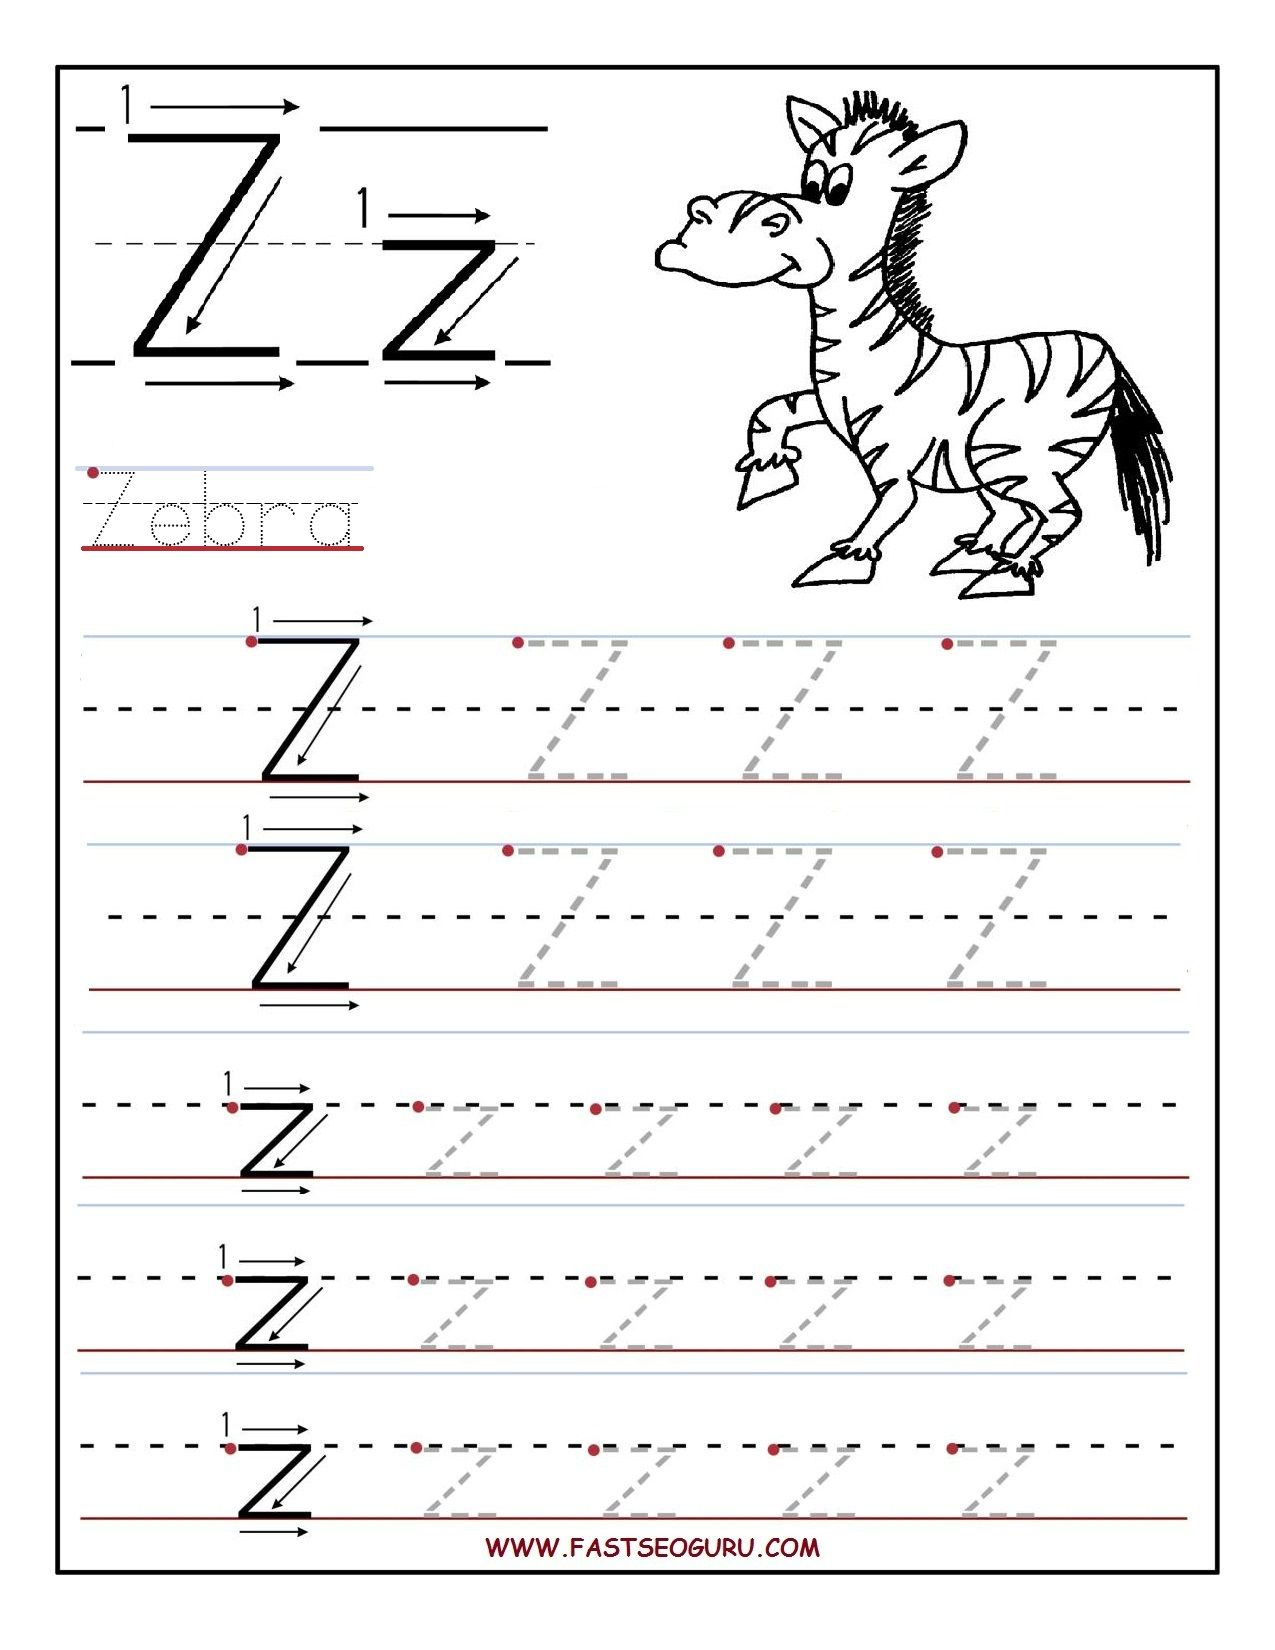 Pinvilfran Gason On Decor | Letter Tracing Worksheets throughout Letter Z Worksheets For Preschool